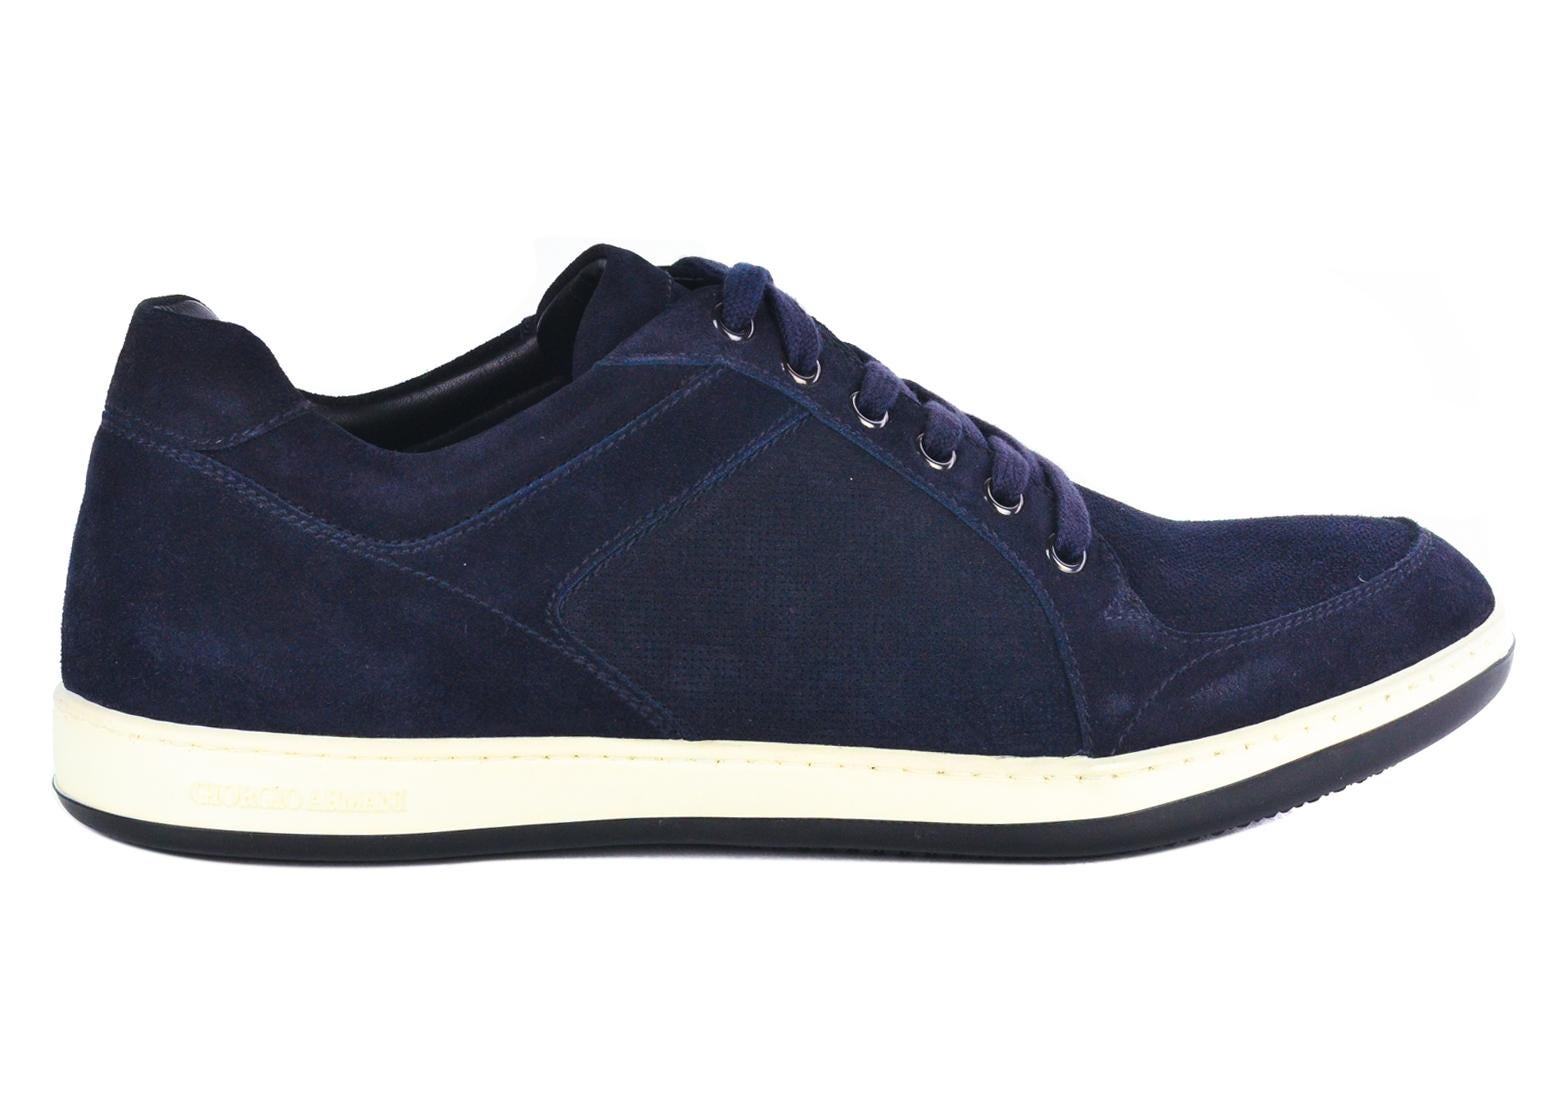 Giorgio Armani Mens Navy Blue Suede Lace Up Sneakers In New Condition For Sale In Brooklyn, NY